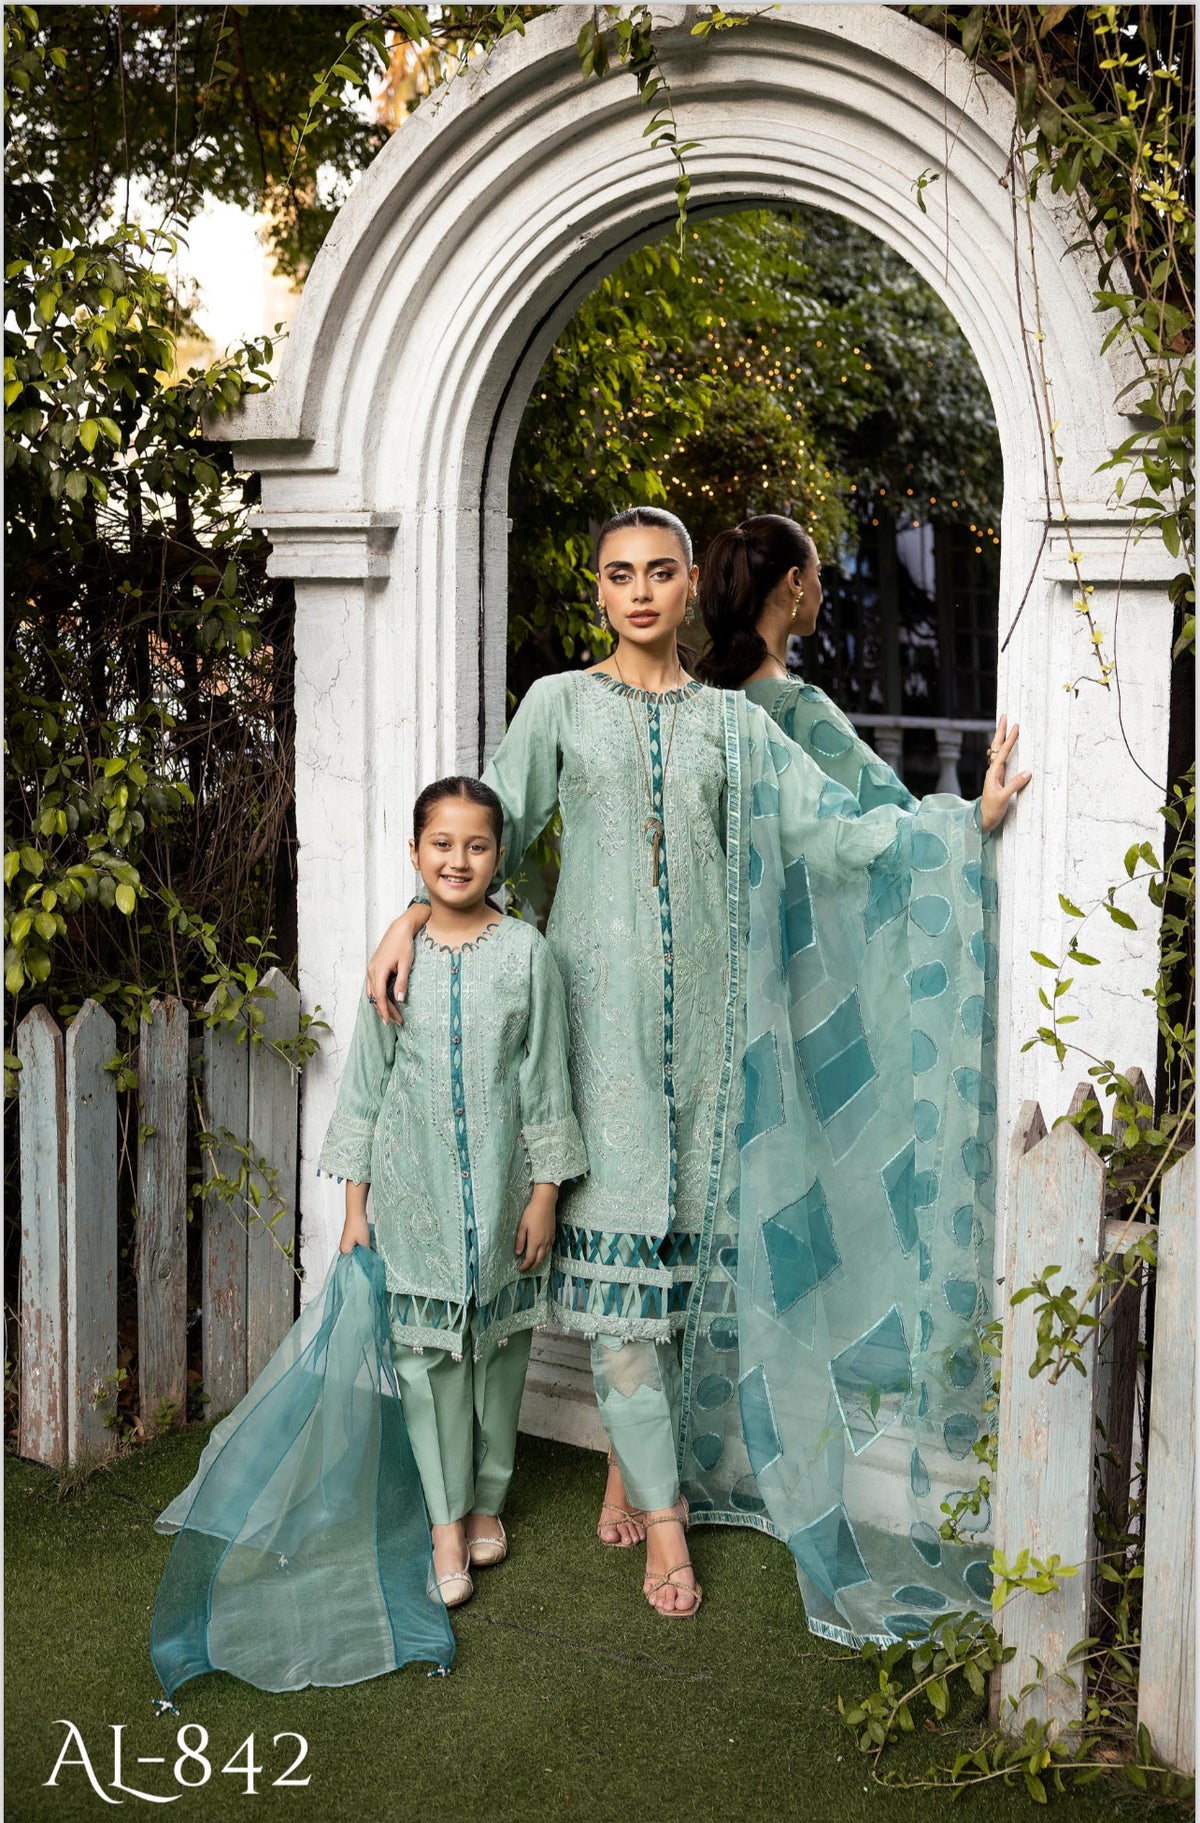 SIMRANS EID LUXURY JACQUARD LAWN MOTHER DAUGHTER:kids 3PC READYMADE SMD4534